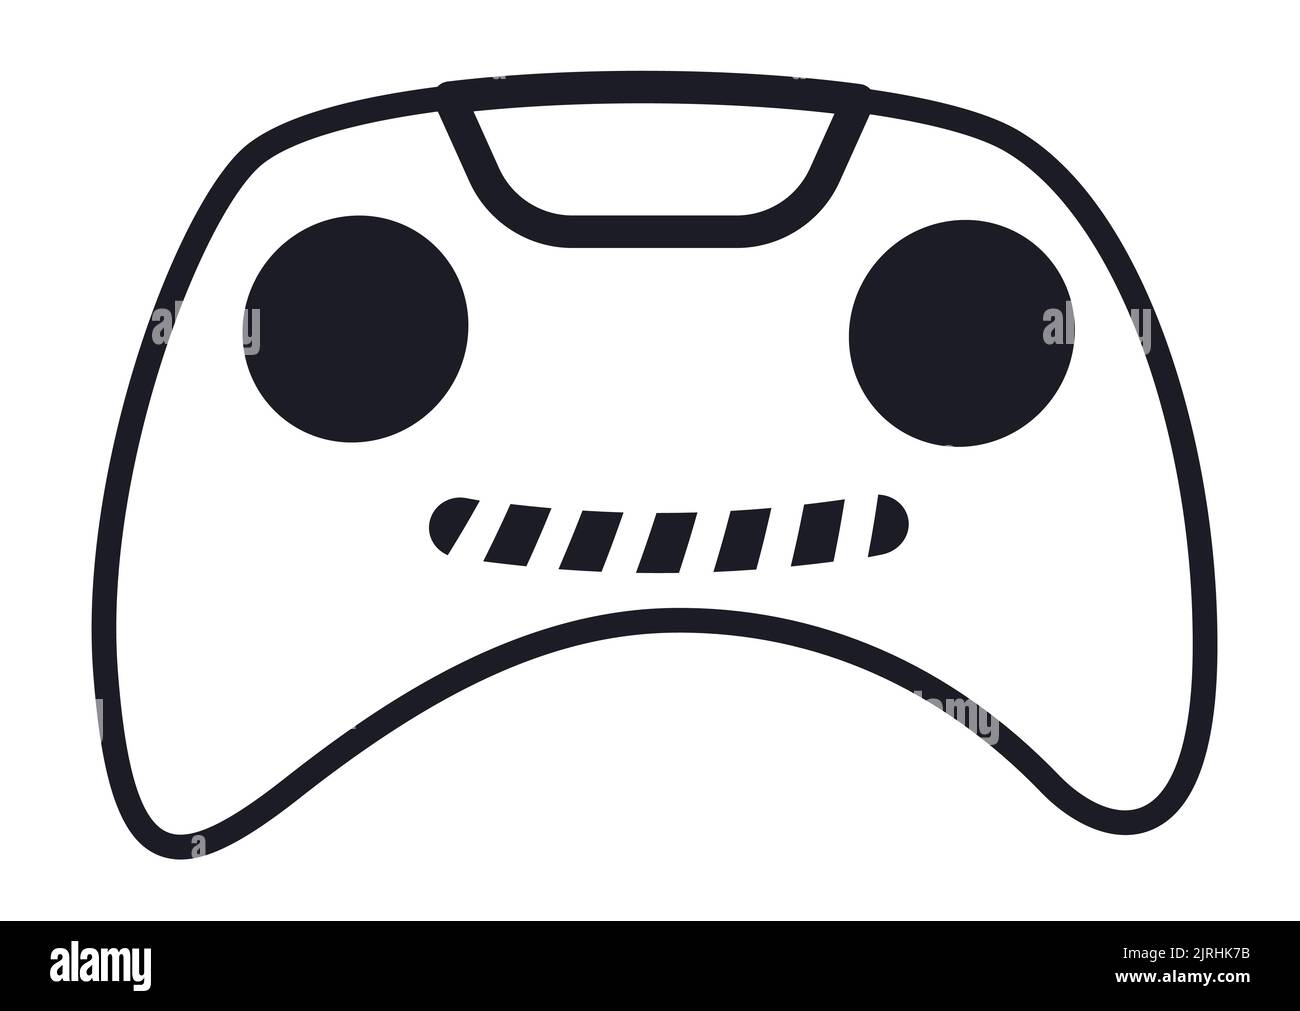 Design in outline style of a video game controller with loading bar like a smile gesture. Design isolated over white background. Stock Vector